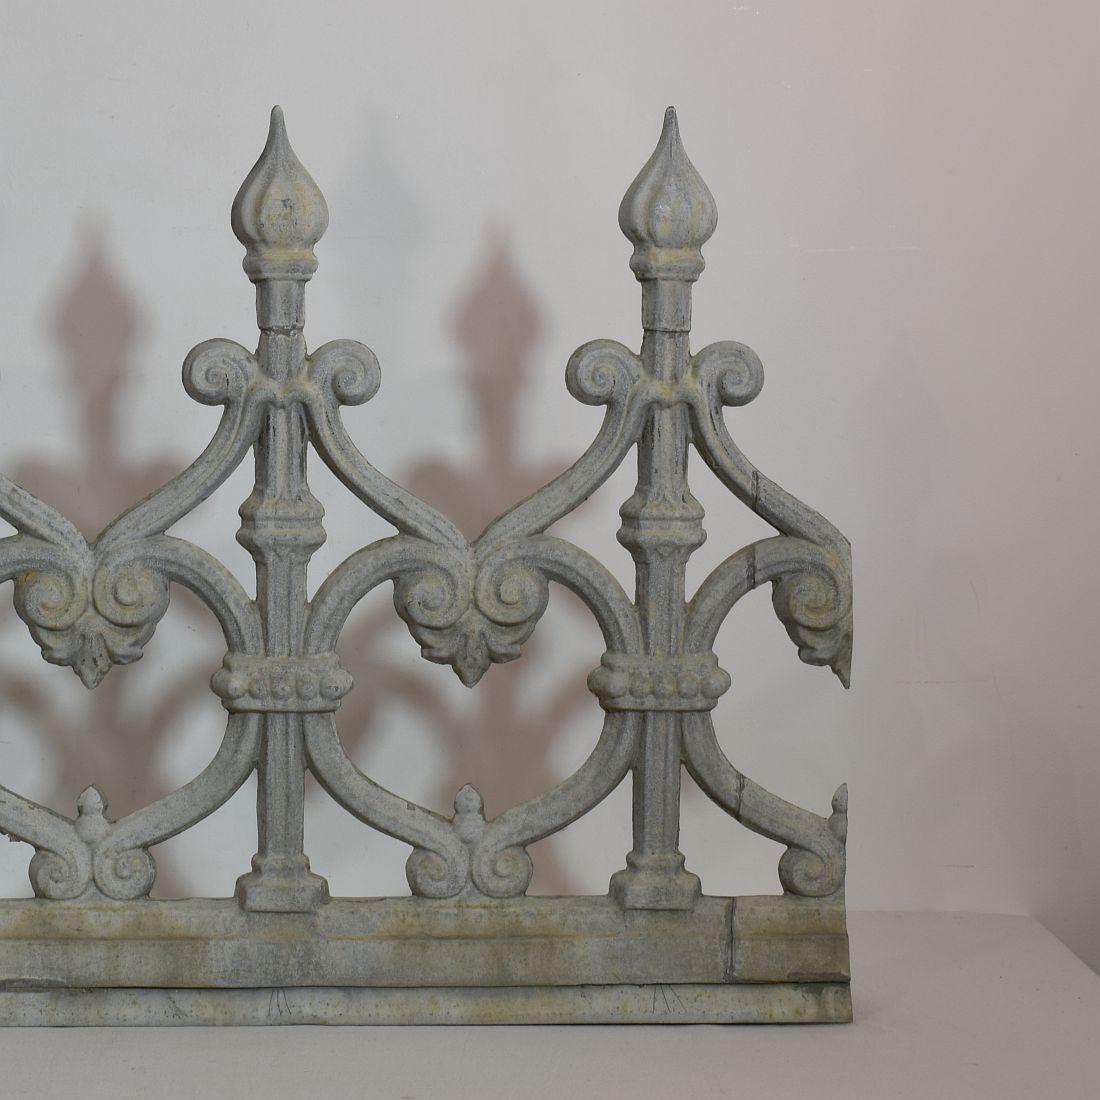 Pair of 19th Century French Zinc Architectural Roof Ornaments or Finials 13